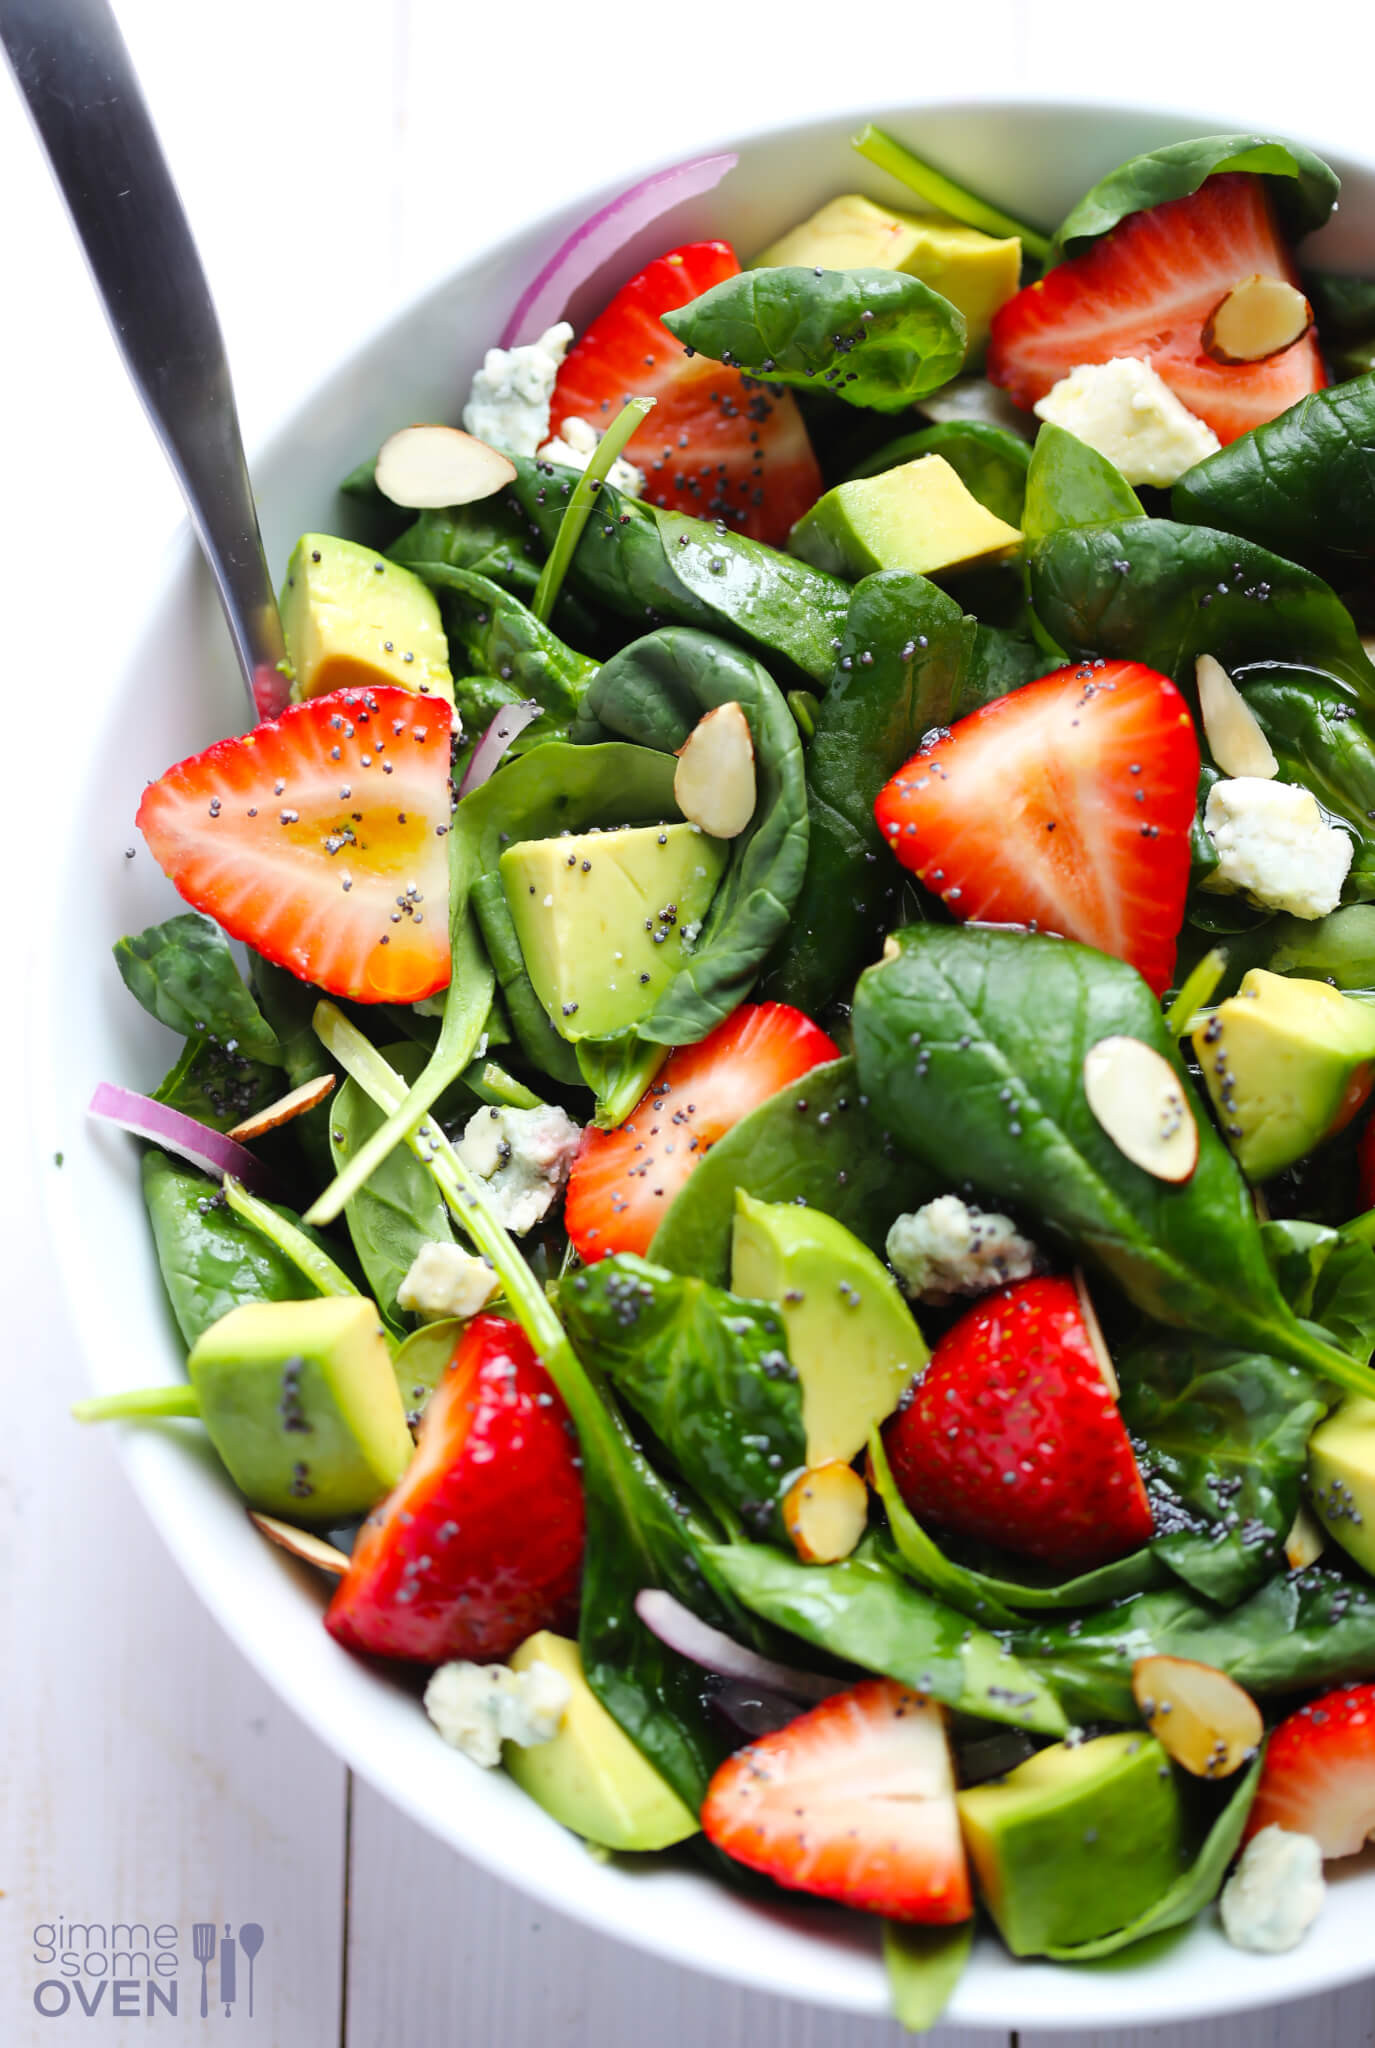 Salad Dressings For Spinach Salad
 Avocado Strawberry Spinach Salad with Poppyseed